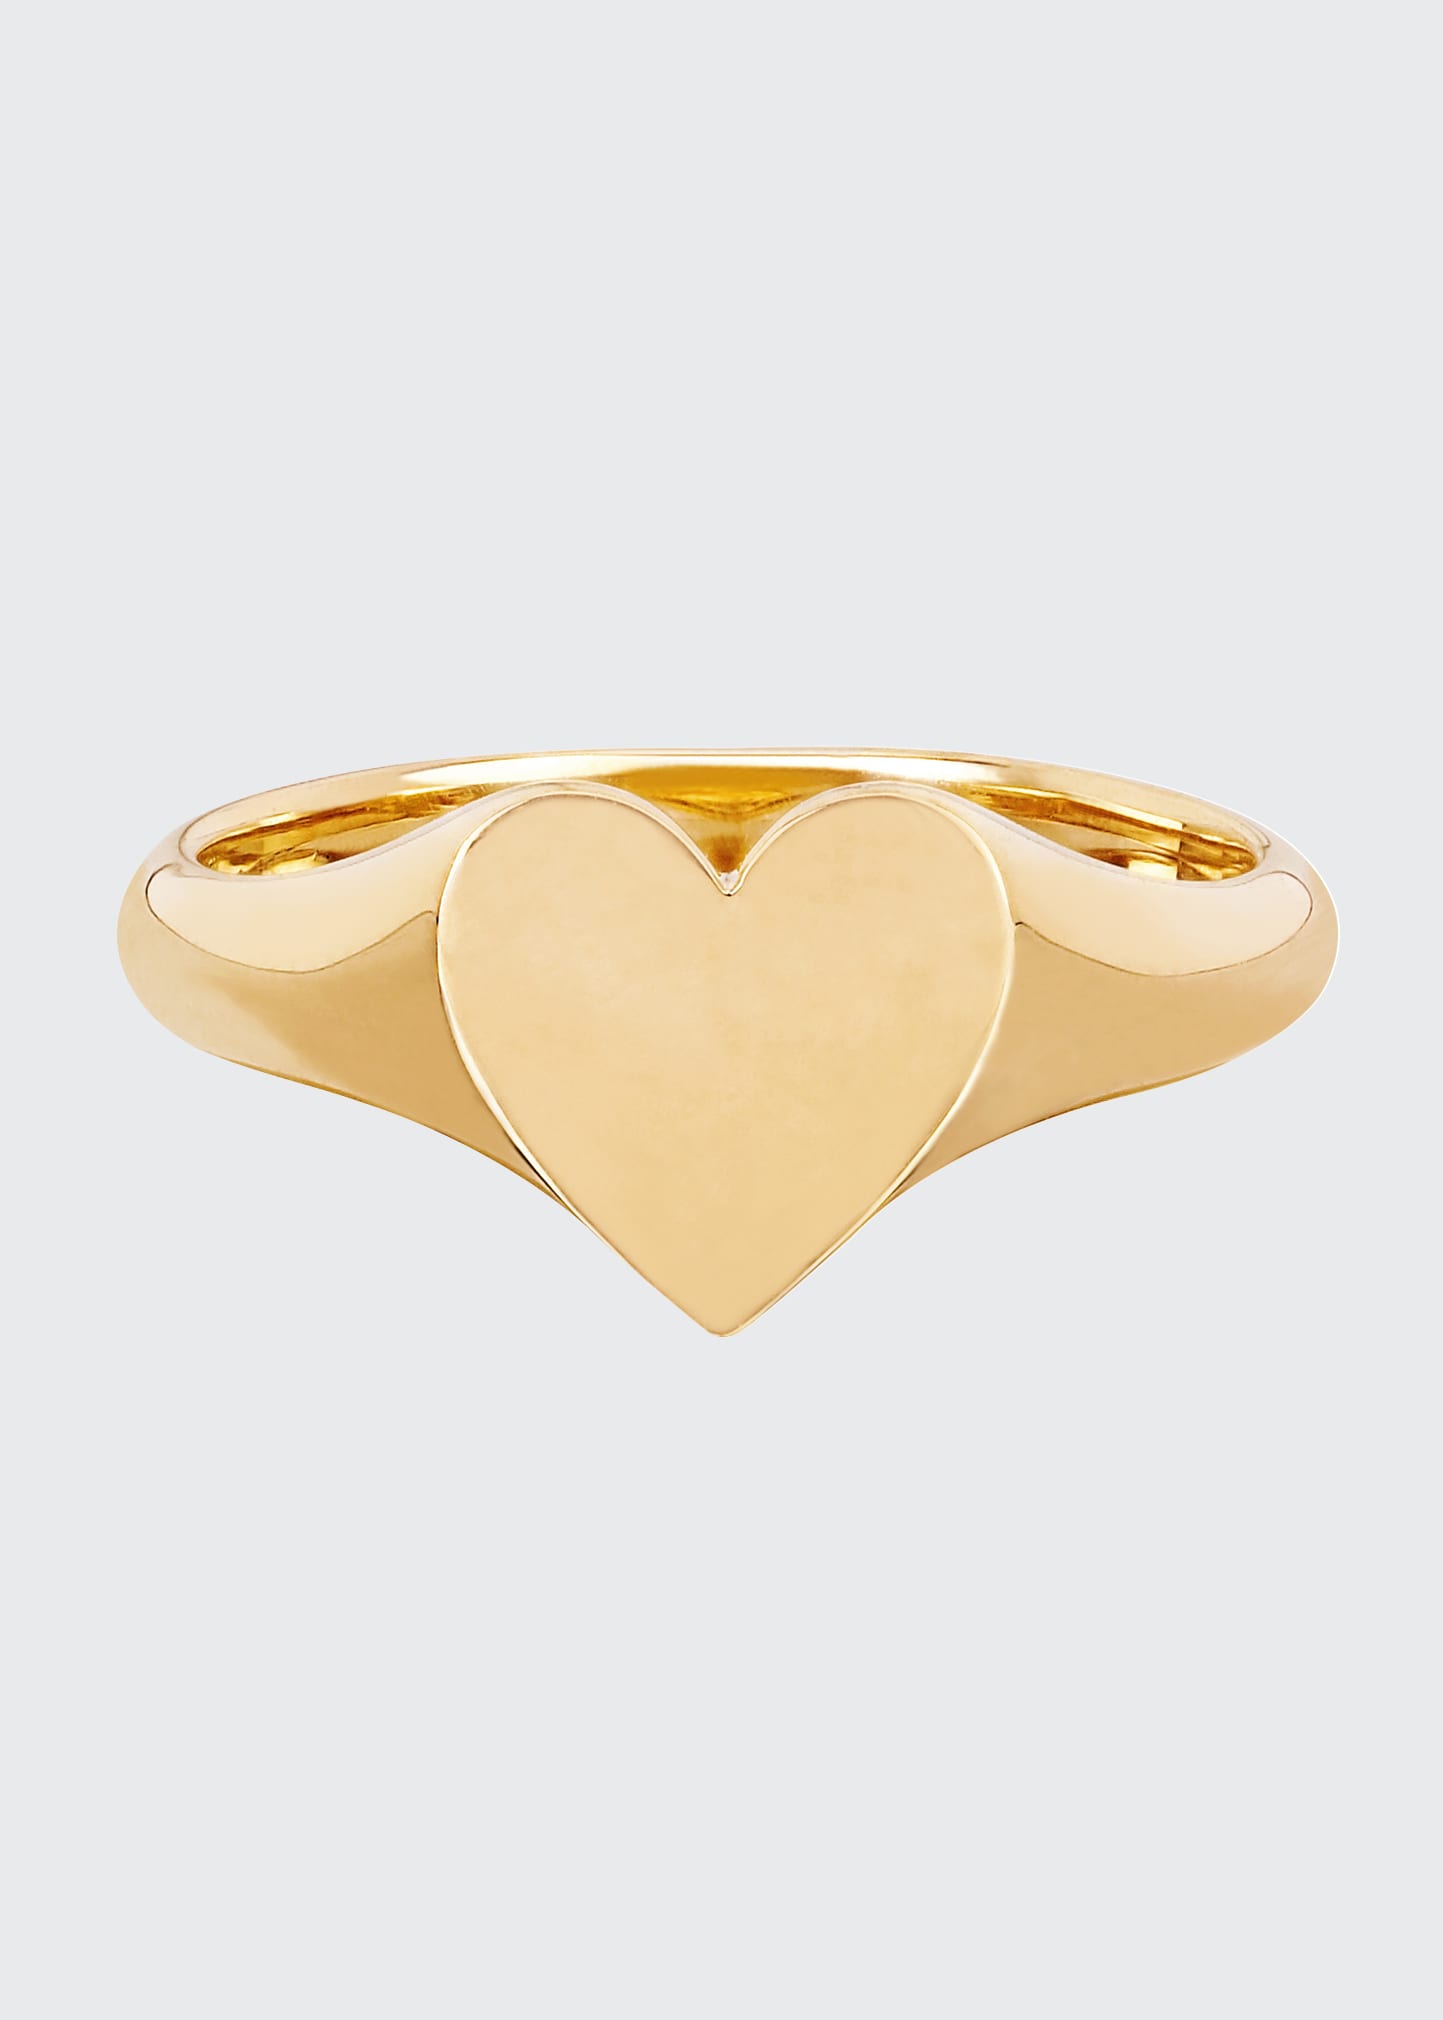 Gold Heart Signet Ring, Size 3.5